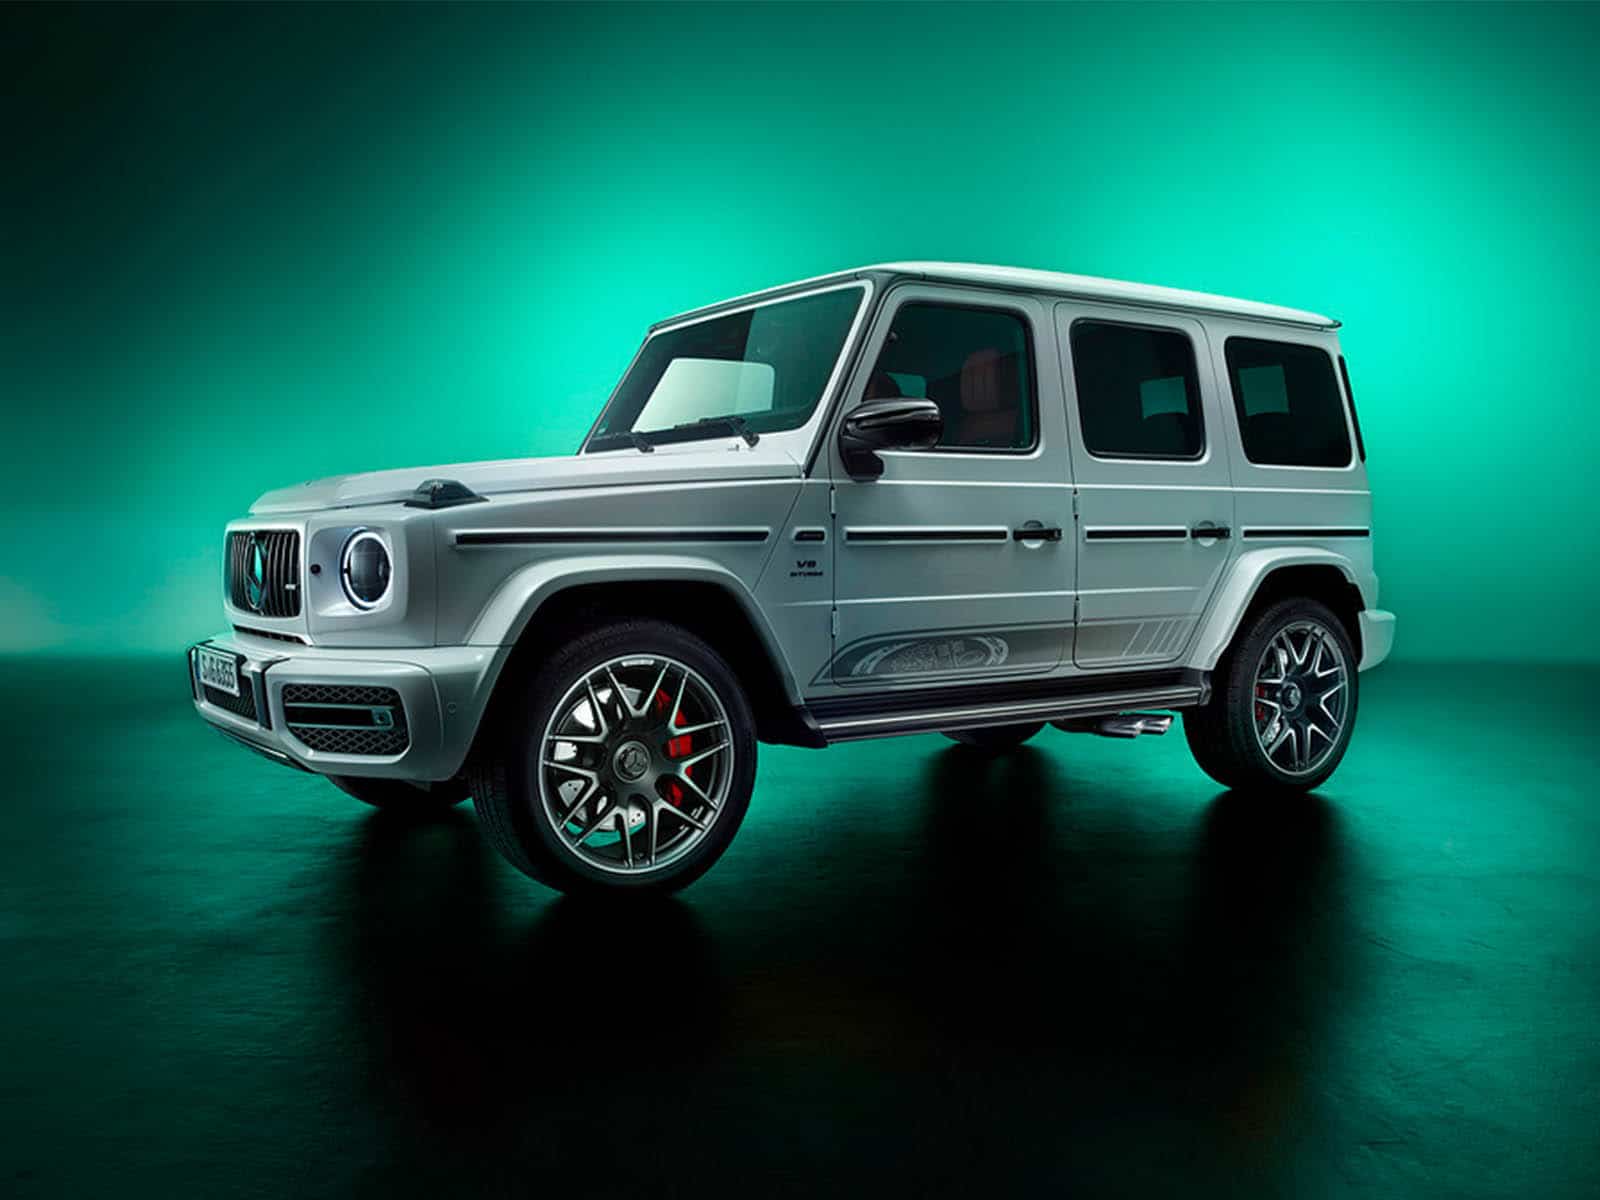 AMG celebrates its 55th anniversary with the Mercedes-AMG G 63 “55th Edition”